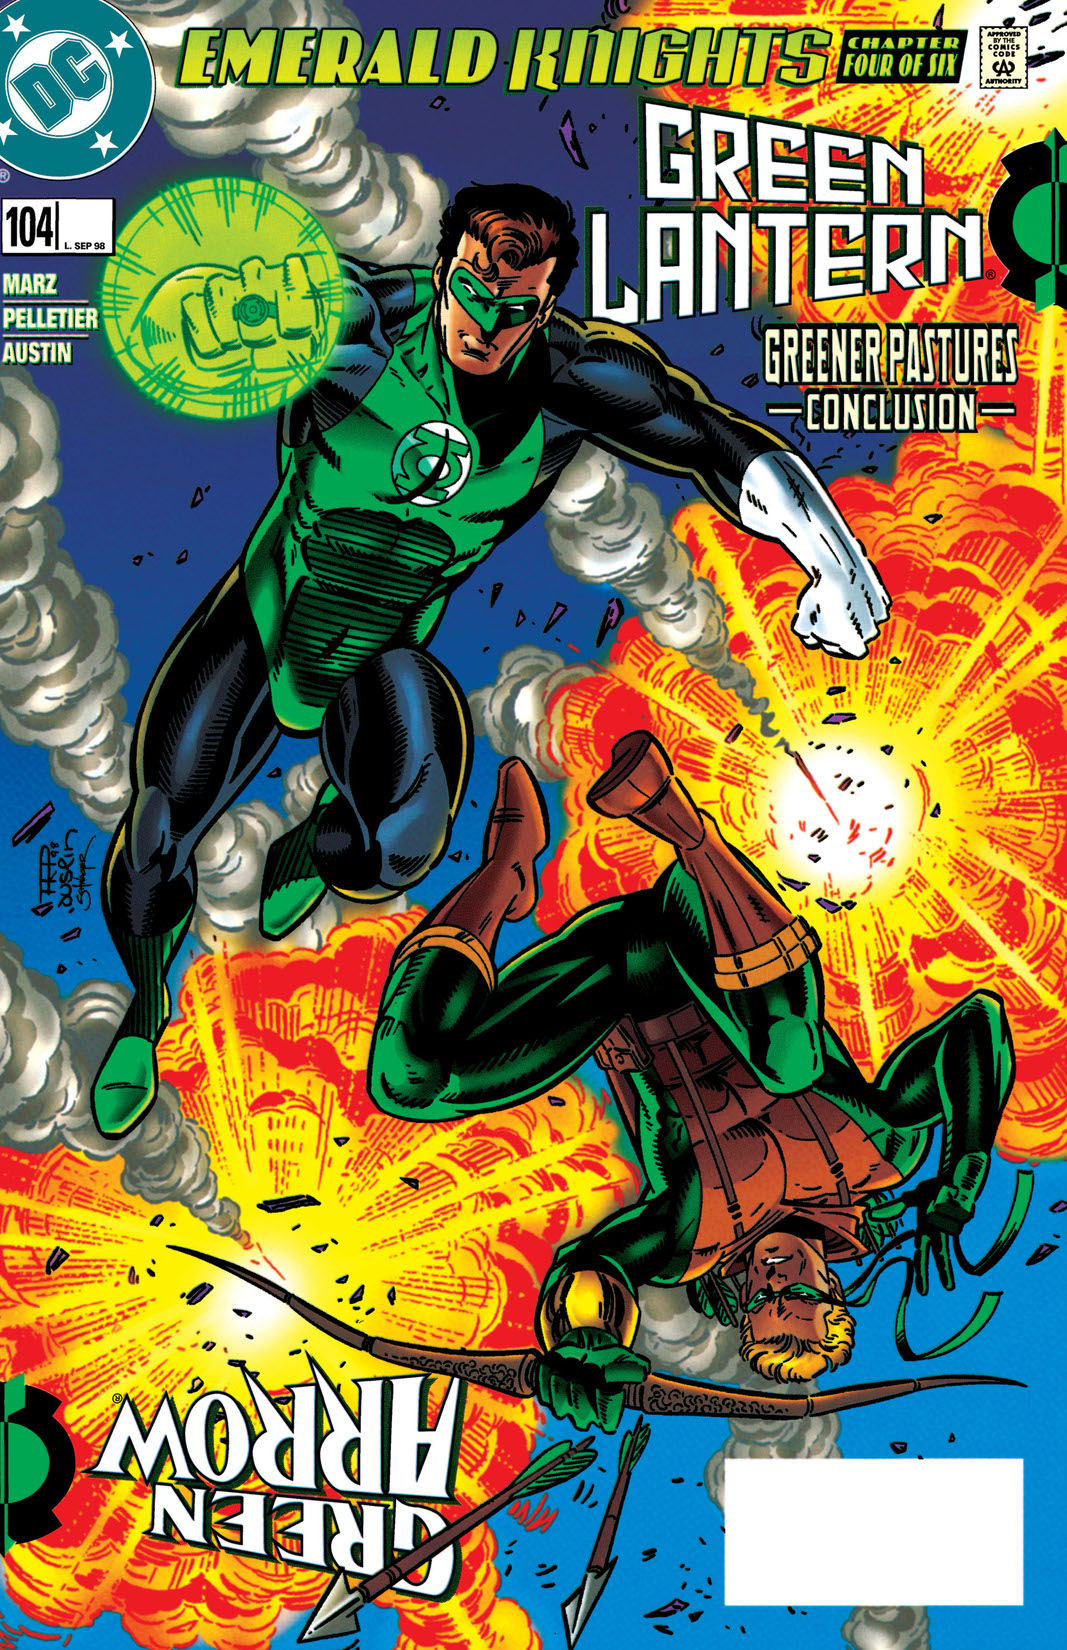 Green Lantern (1990-) #104 preview images